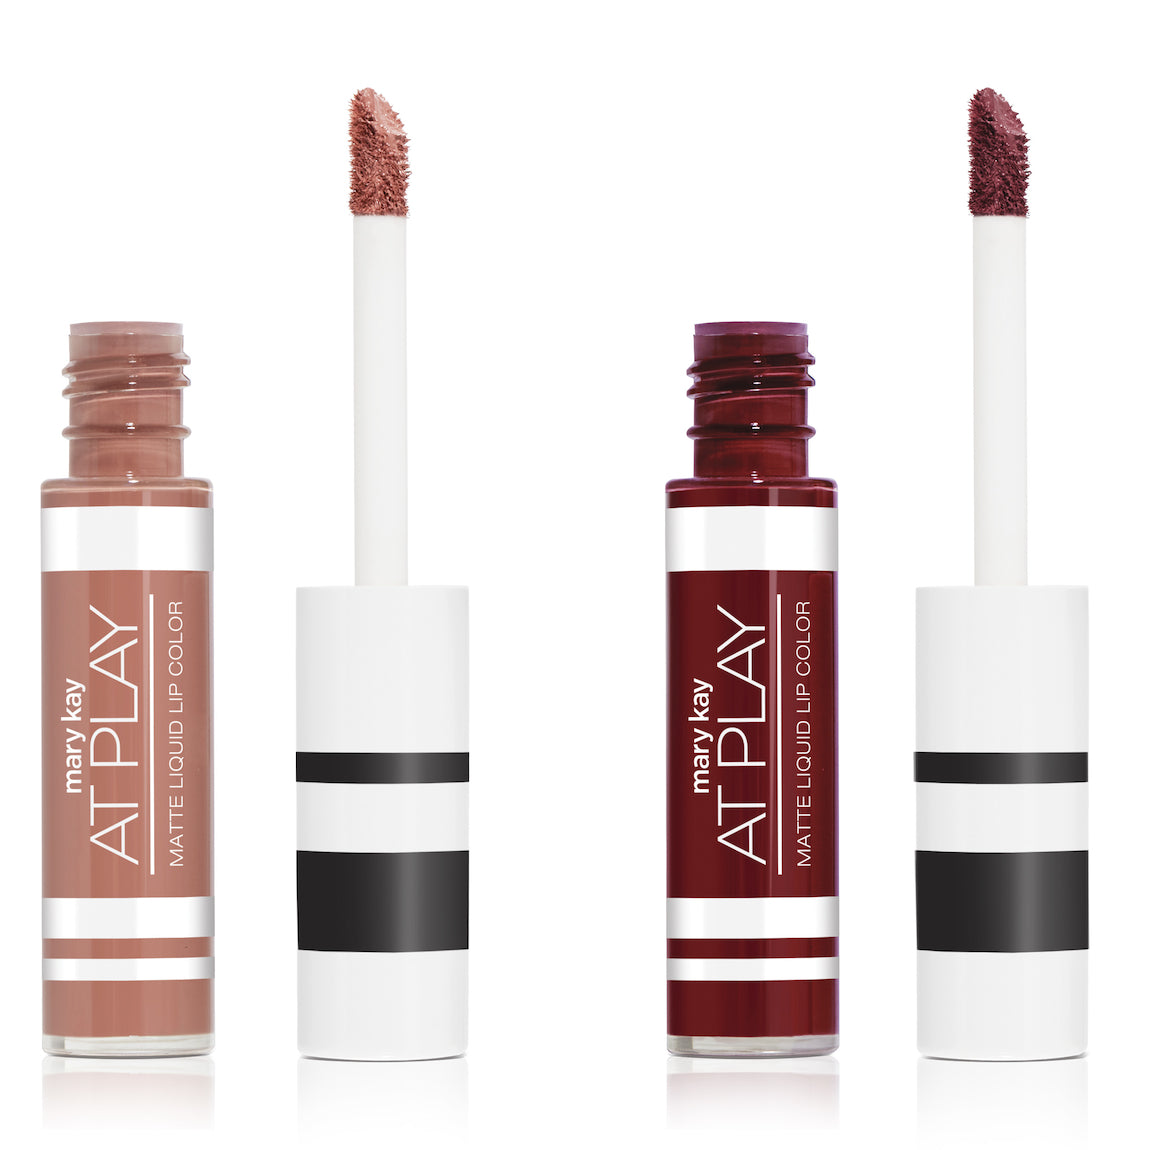 Mini Set de Labiales Líquidos Mate Mary Kay® At Play® Taupe That & Red Envy